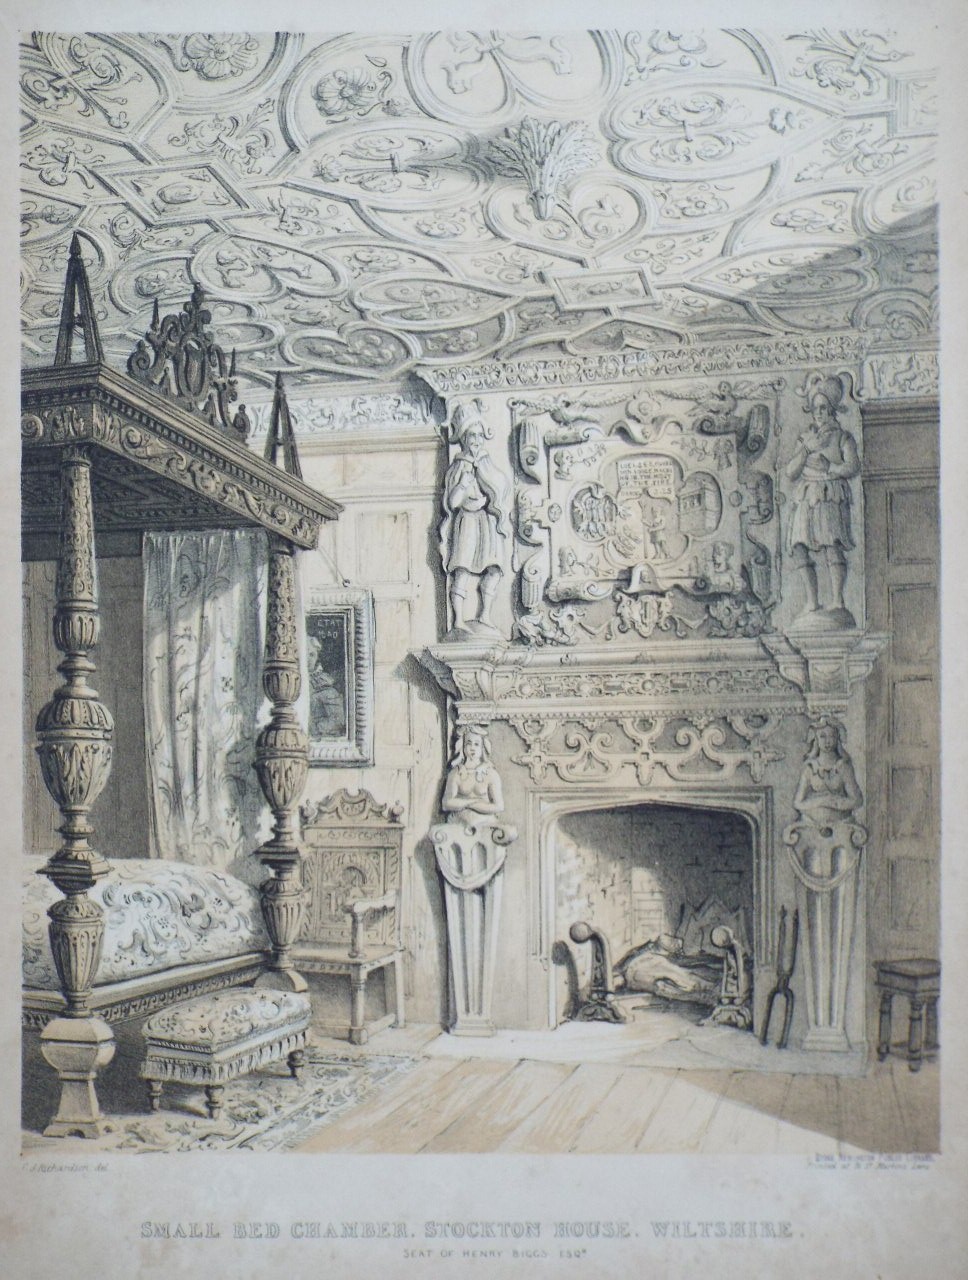 Lithograph - Small Bed Chamber, Stockton House, Wiltshire.